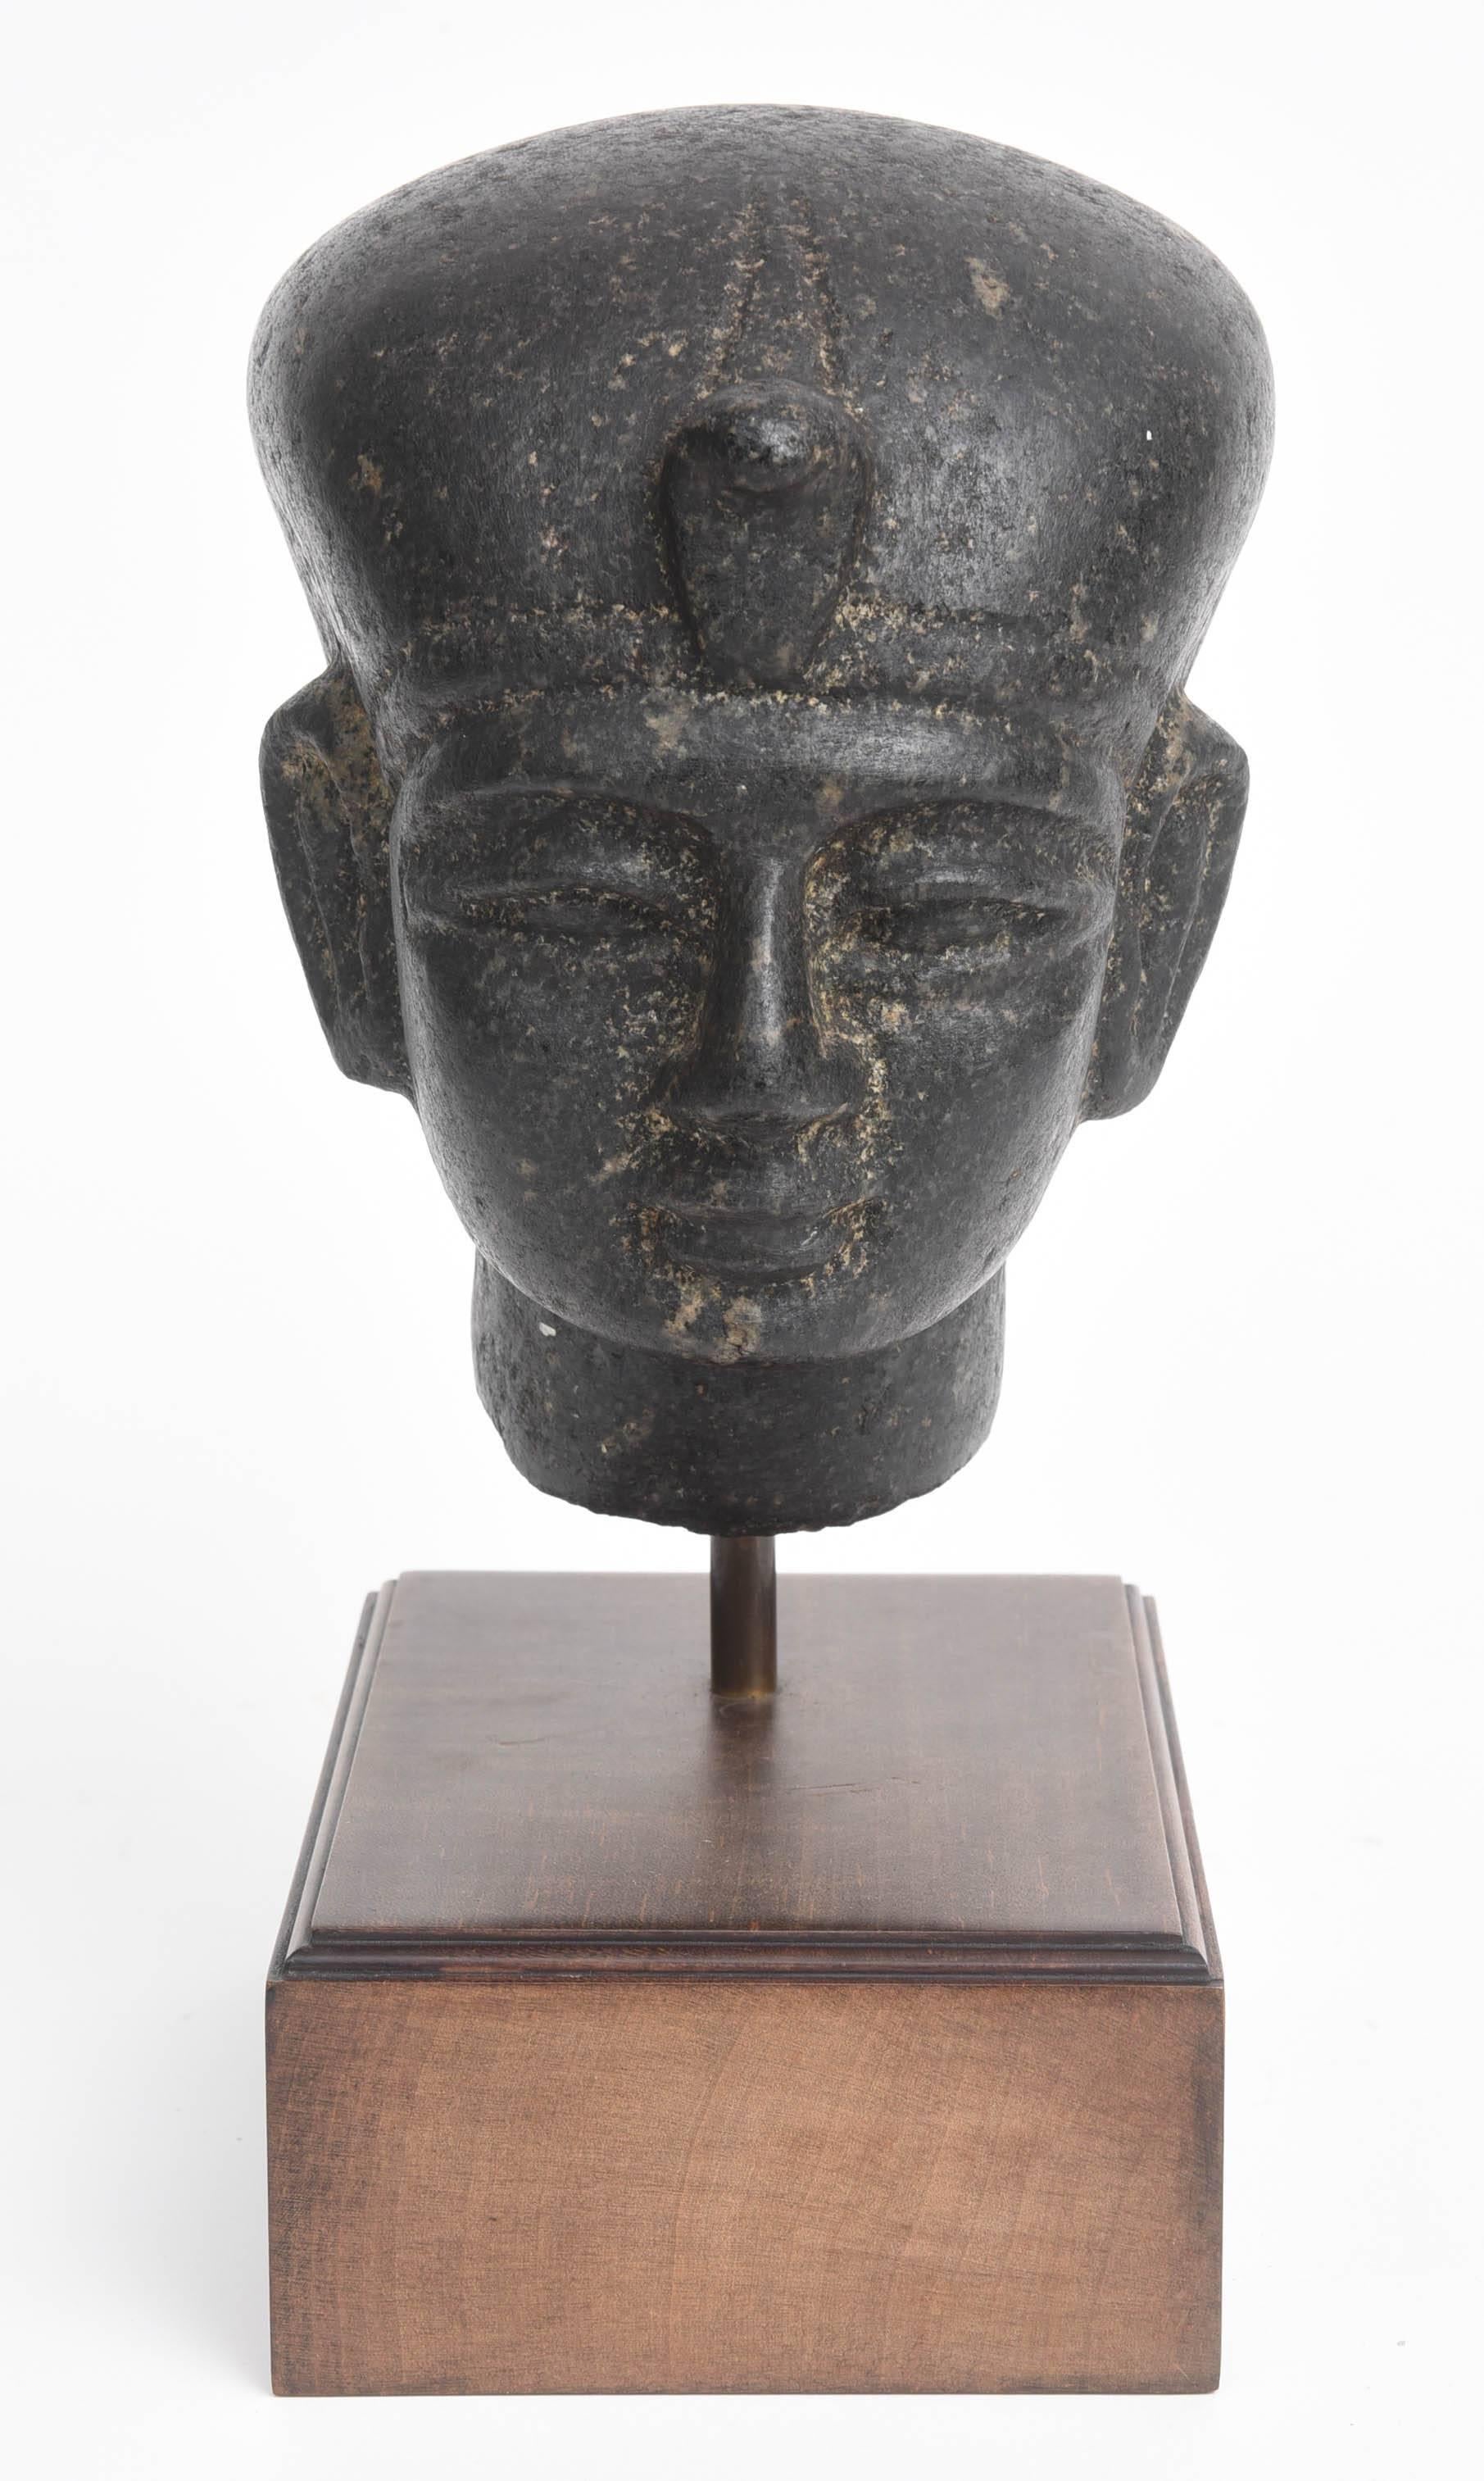 Exquisitely carved head of the pharaoh wearing a head cloth with fragmentary uraeus with a serene expression.  

Ex. collection Theodore and Aristea Halkedis
Acquired London 1980s